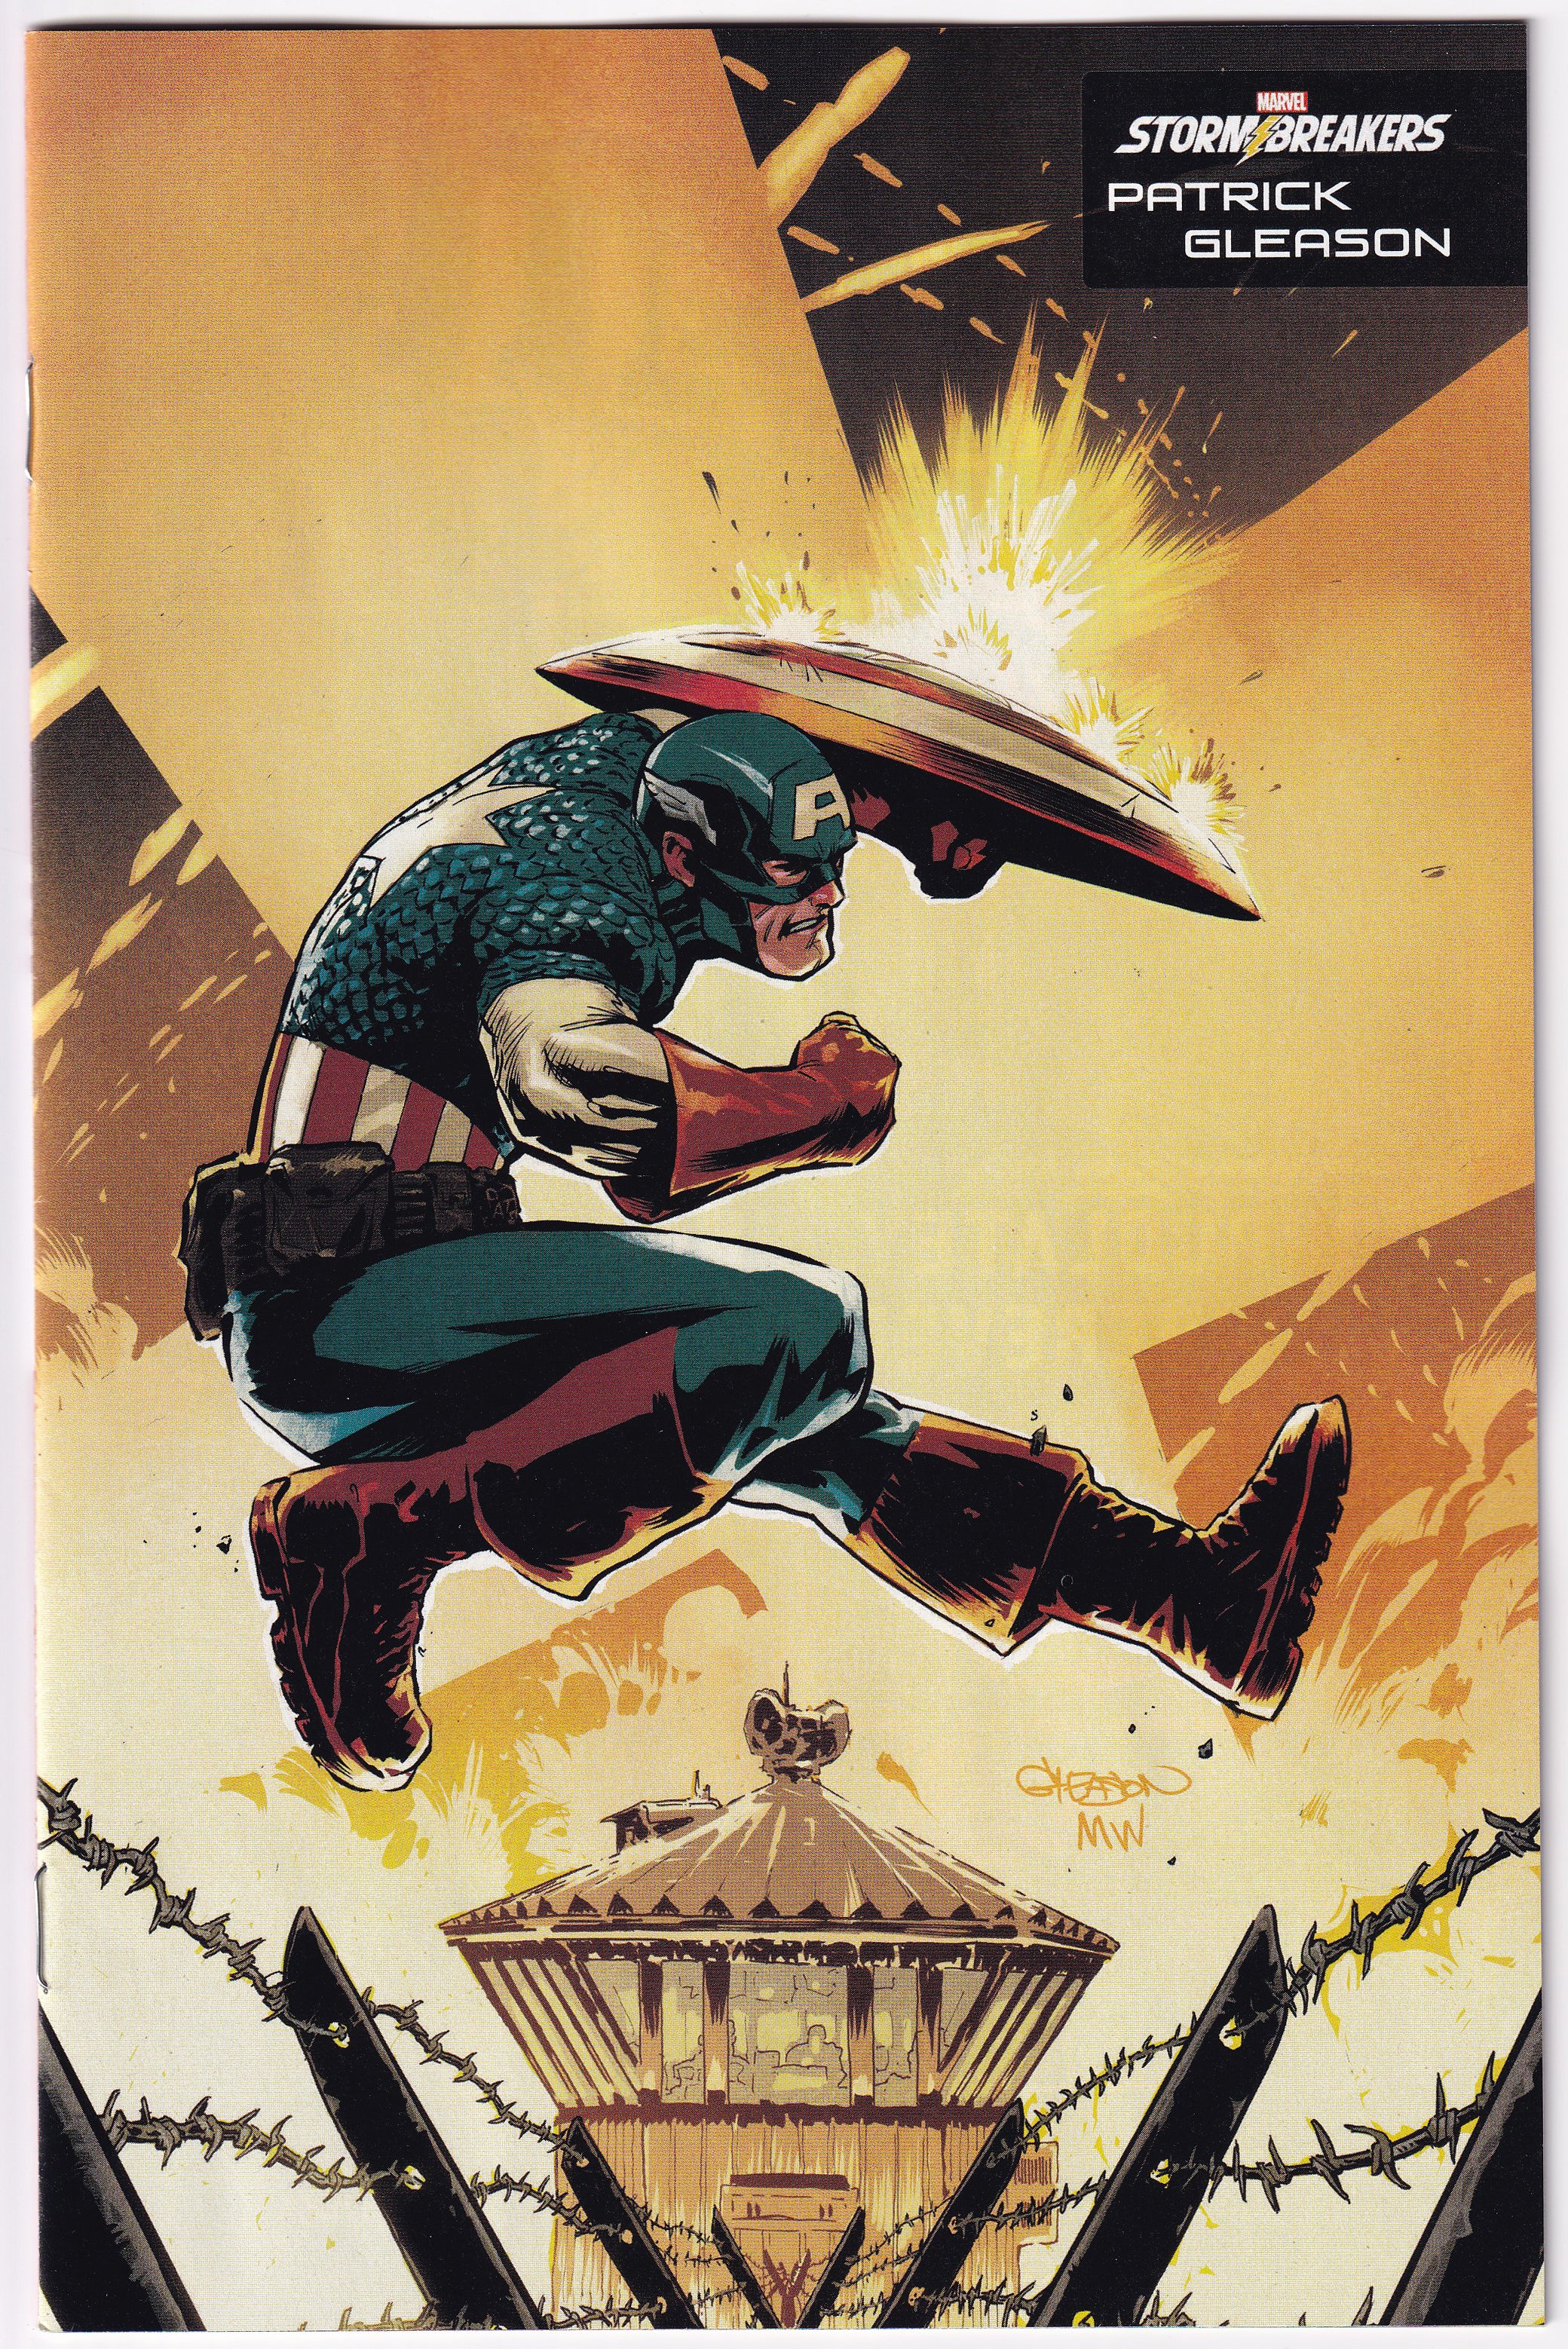 Photo of Captain America Vol. 9 (2021)  Issue 27C  Near Mint Comic sold by Stronghold Collectibles